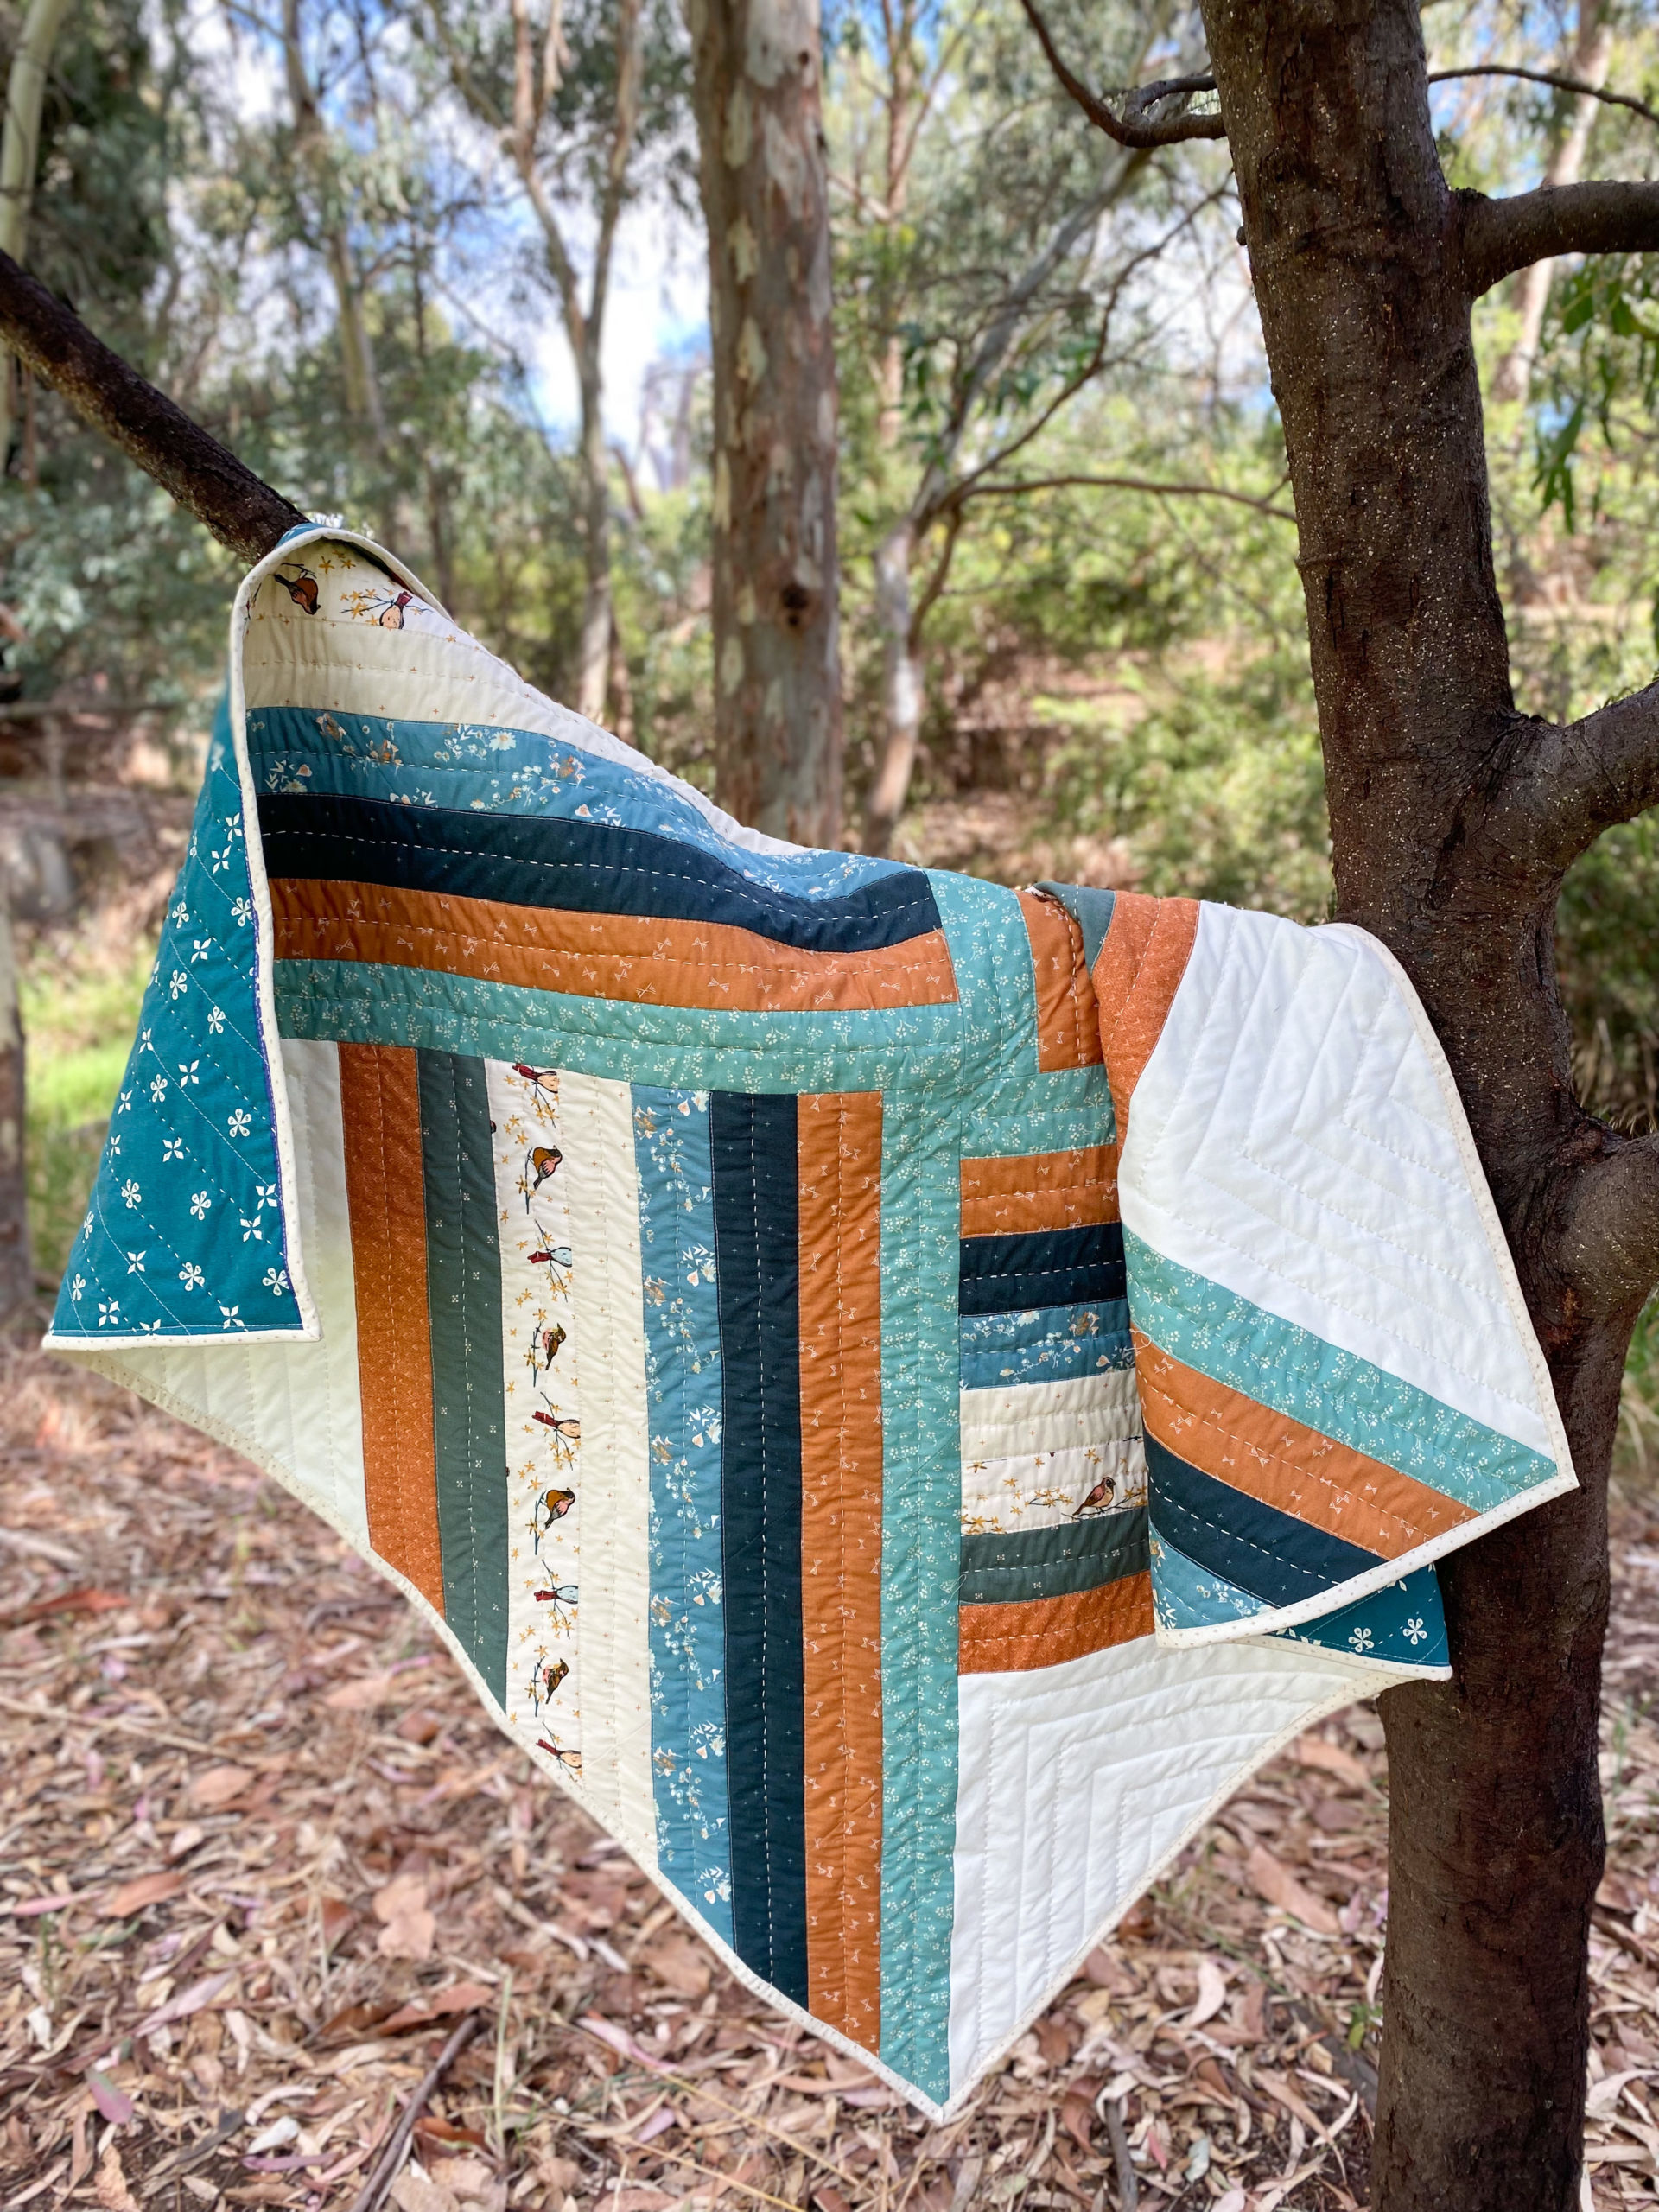 Get inspired to make your Adventureland quilt with endless color options! suzyquilts.com #quilting #quiltpattern